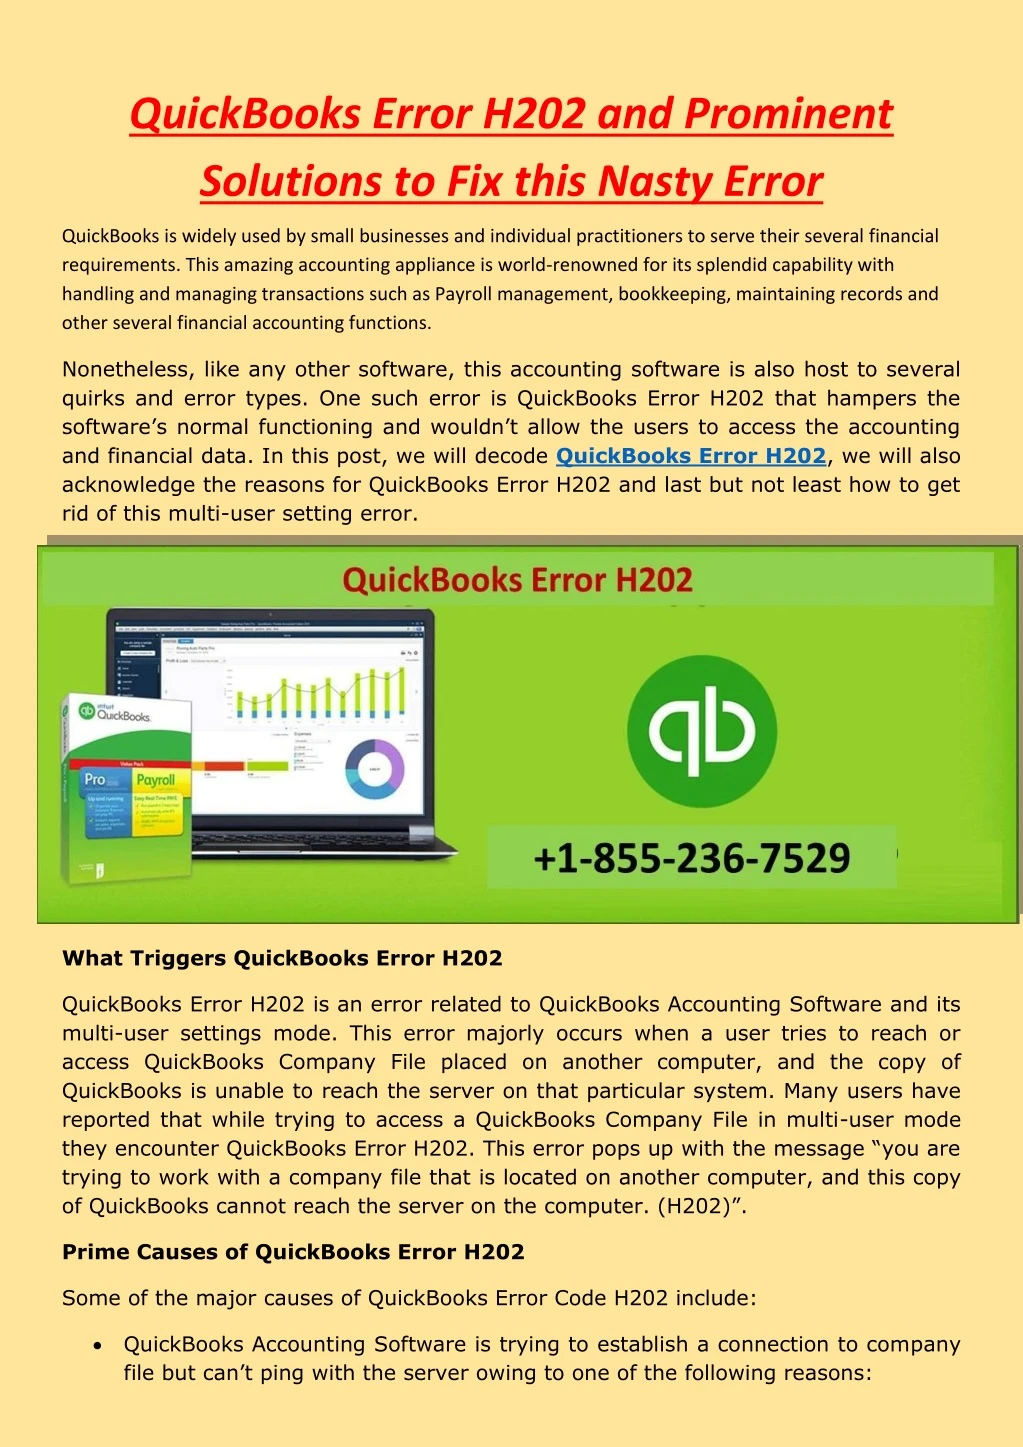 quickbooks error h202 and prominent solutions